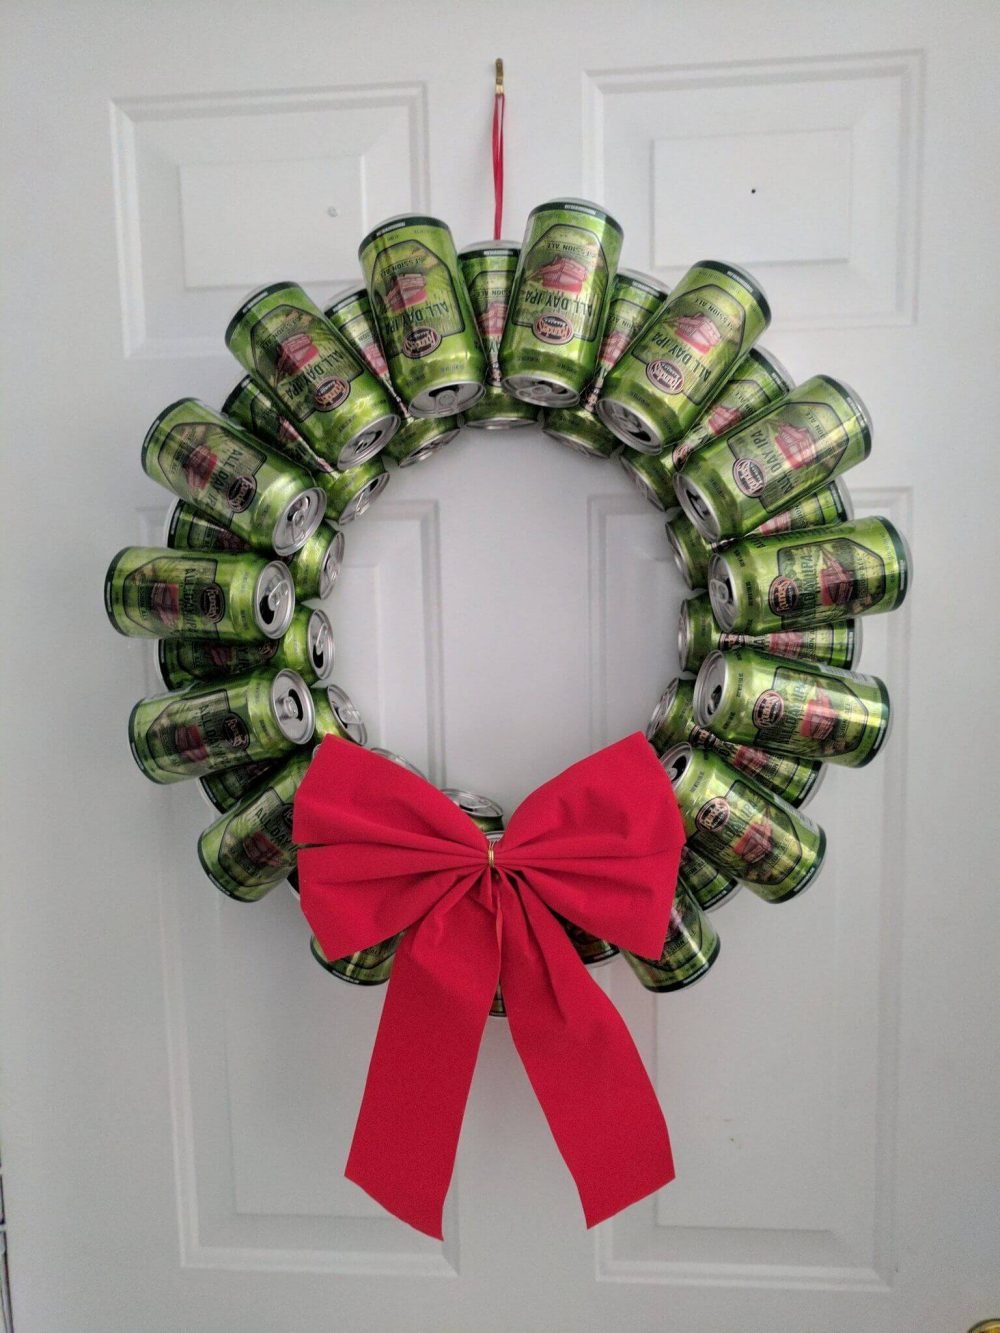 A wreath made out of cans with a red bow
